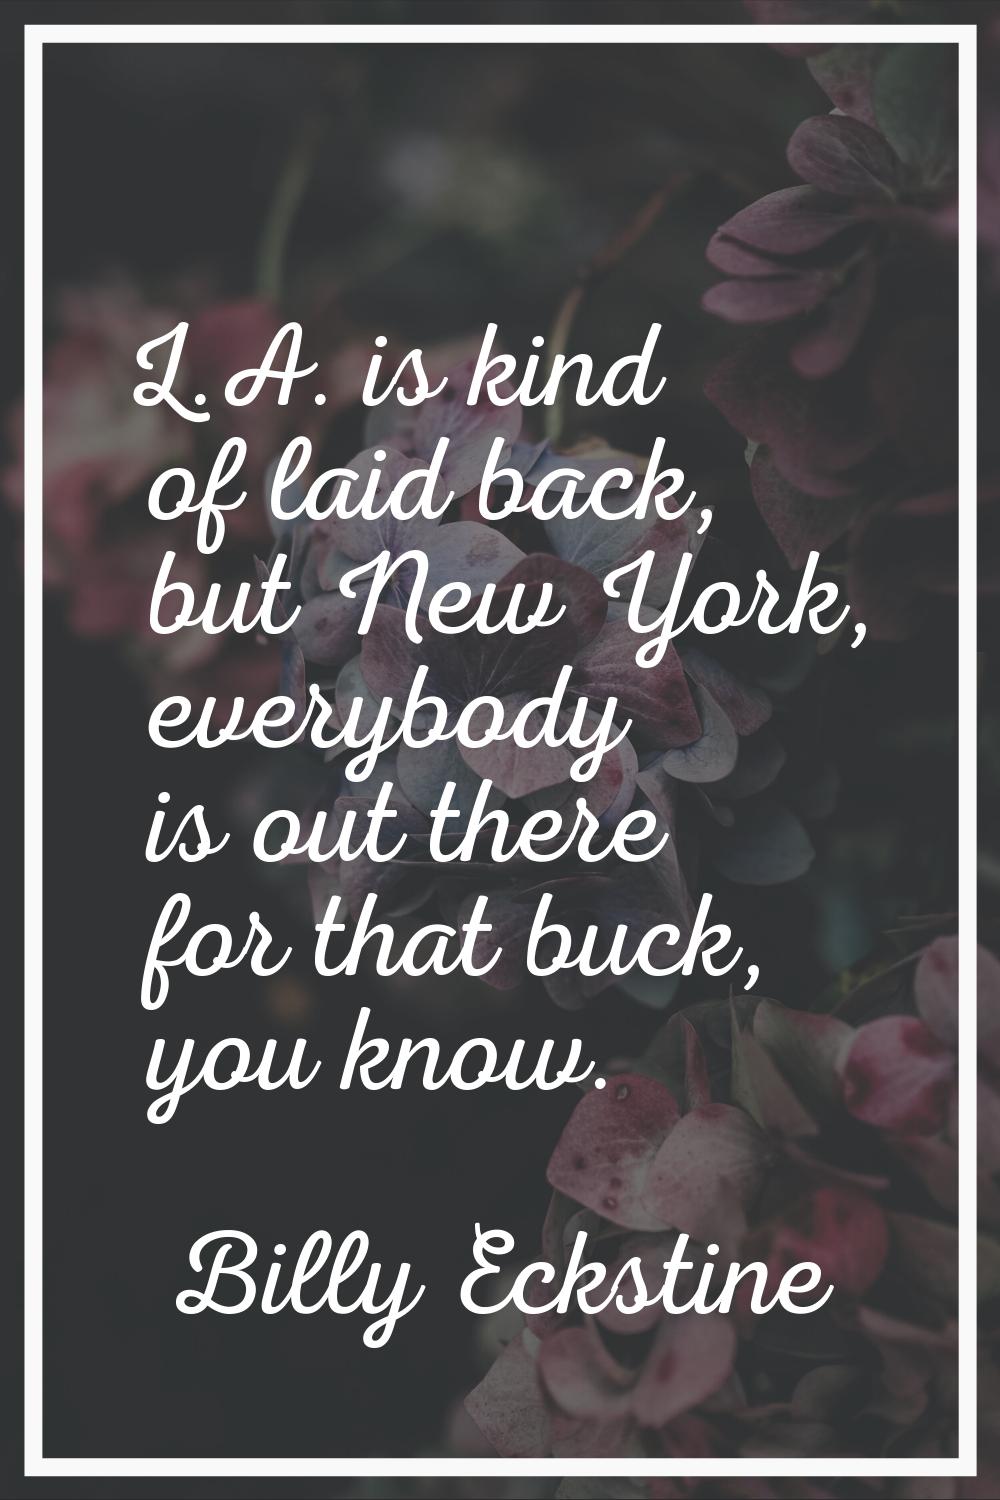 L.A. is kind of laid back, but New York, everybody is out there for that buck, you know.